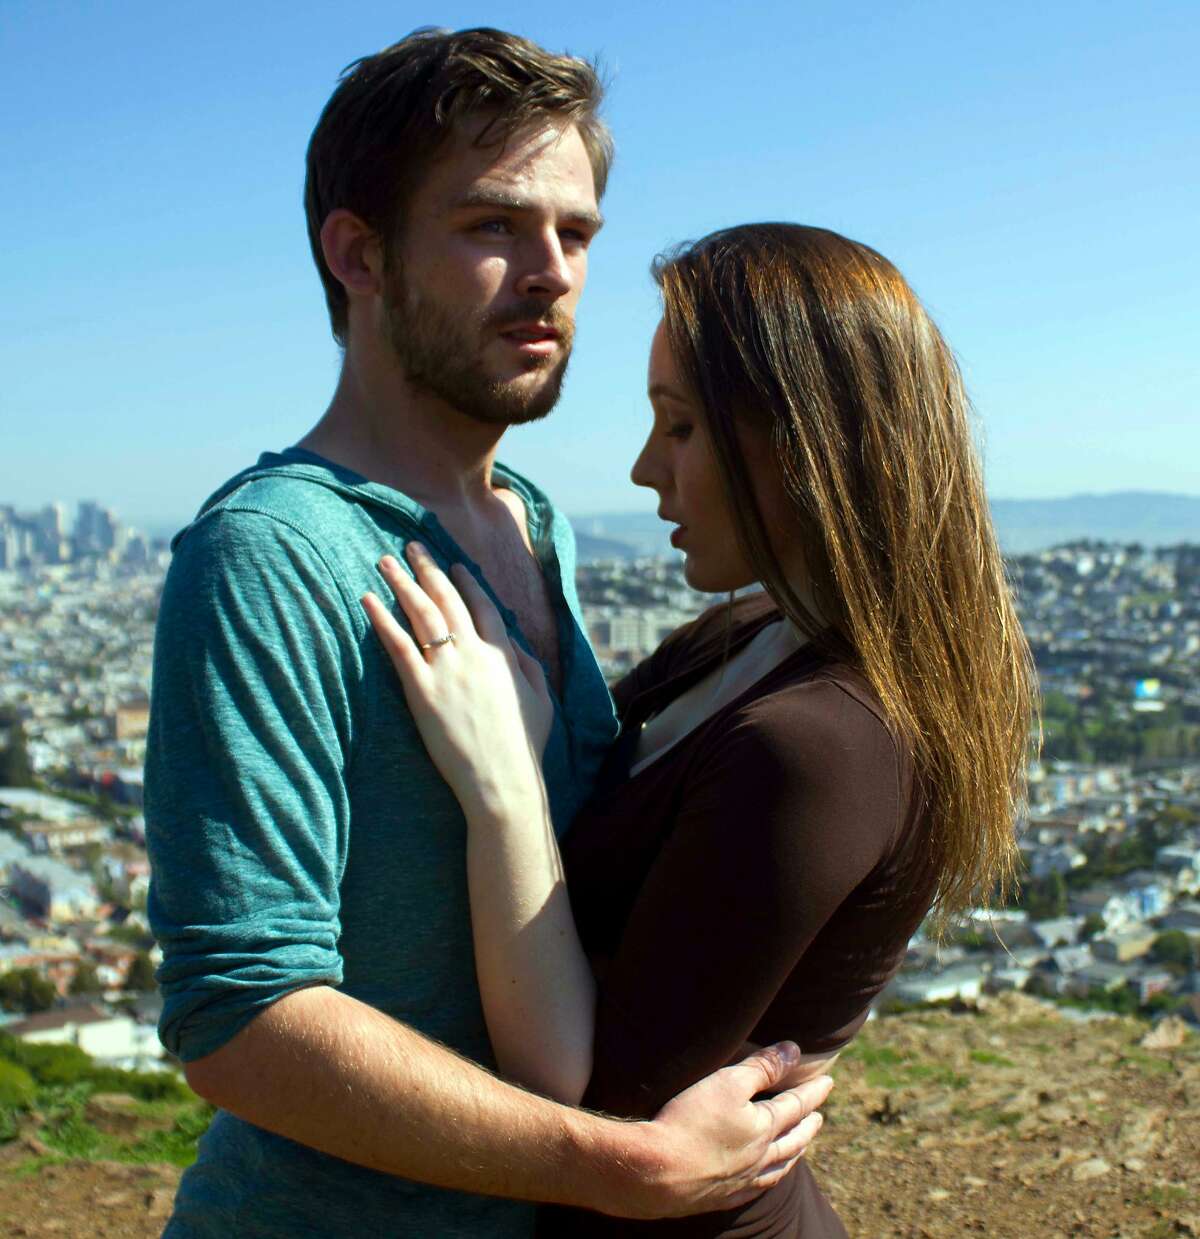 Michael McDonald plays Raphael, a choreographer "in love with love," and Alyssa Johnson plays Sienna, an aspiring dancer from Fresno, in BrickaBrack's "never fall so heavily again." Performances 16-25 at Dance Mission Theater, San Francisco.